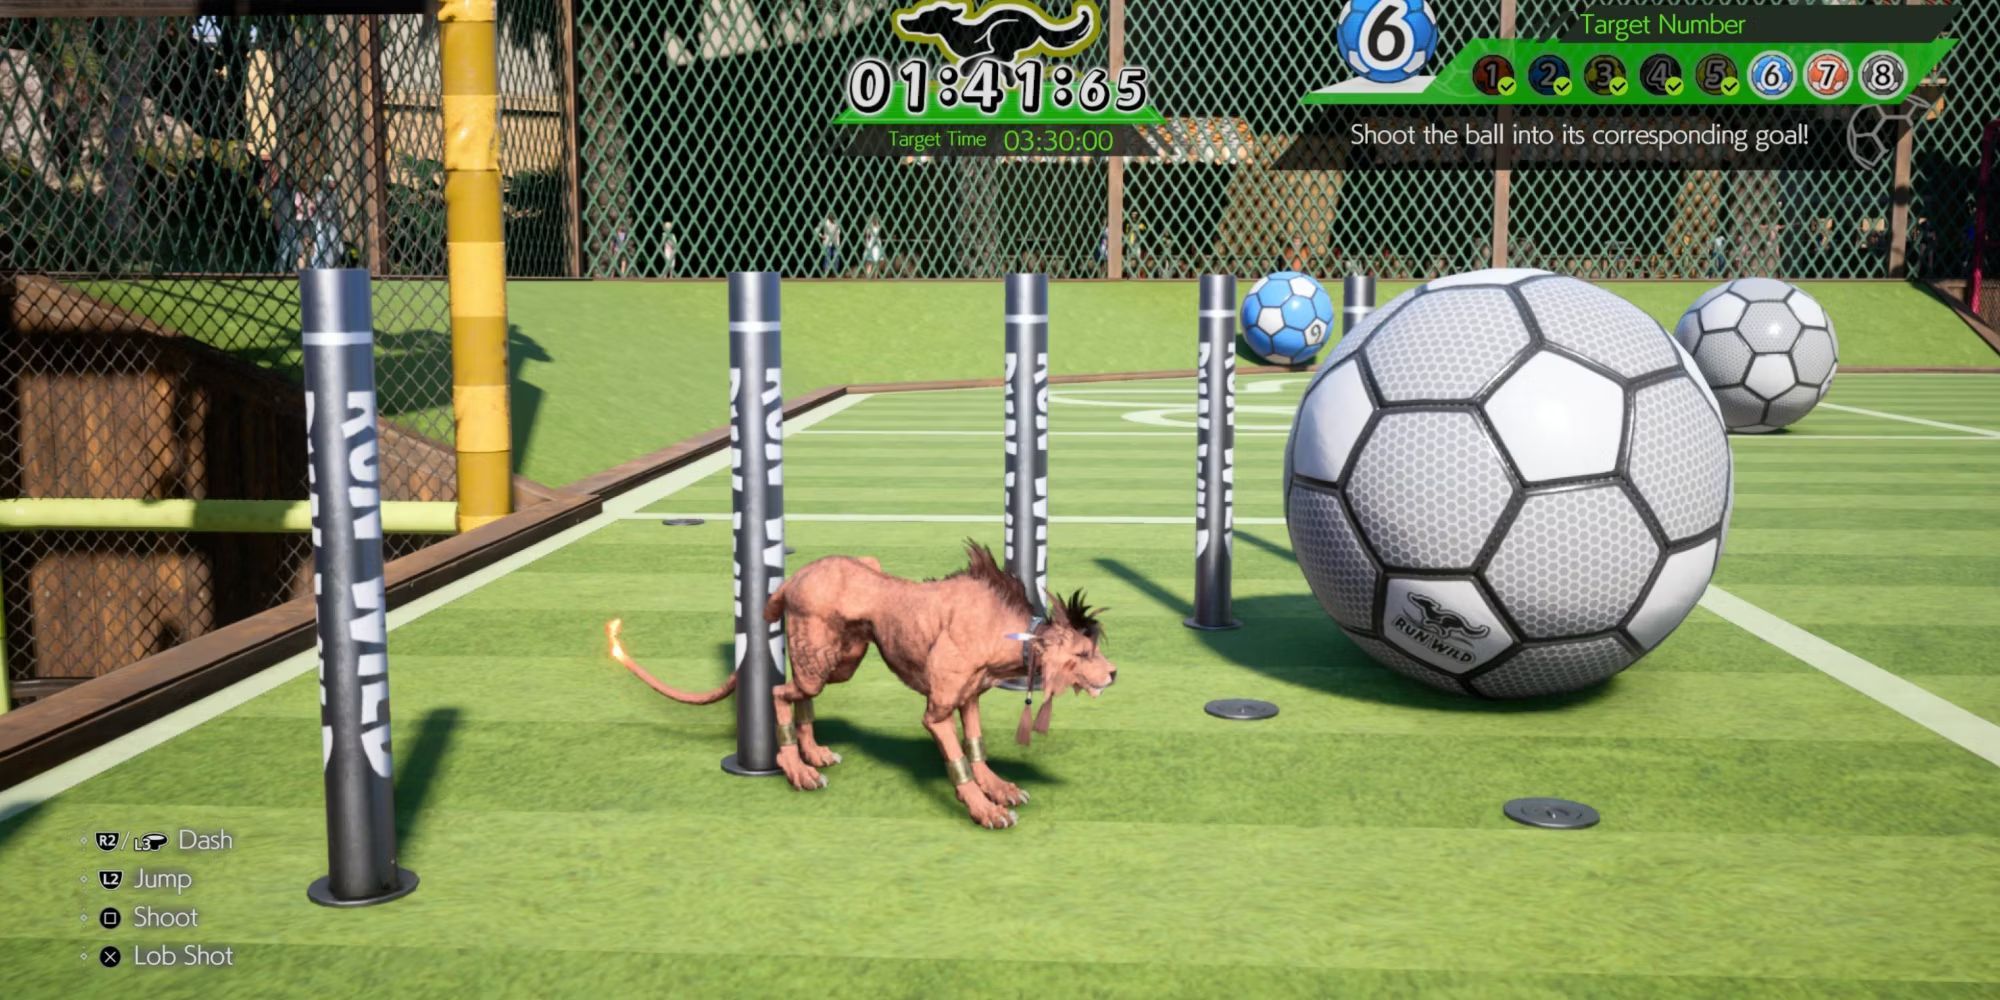 Screenshot from Final Fantasy 7 Rebirth with Red XIII standing on a football pitch with large balls in the background.